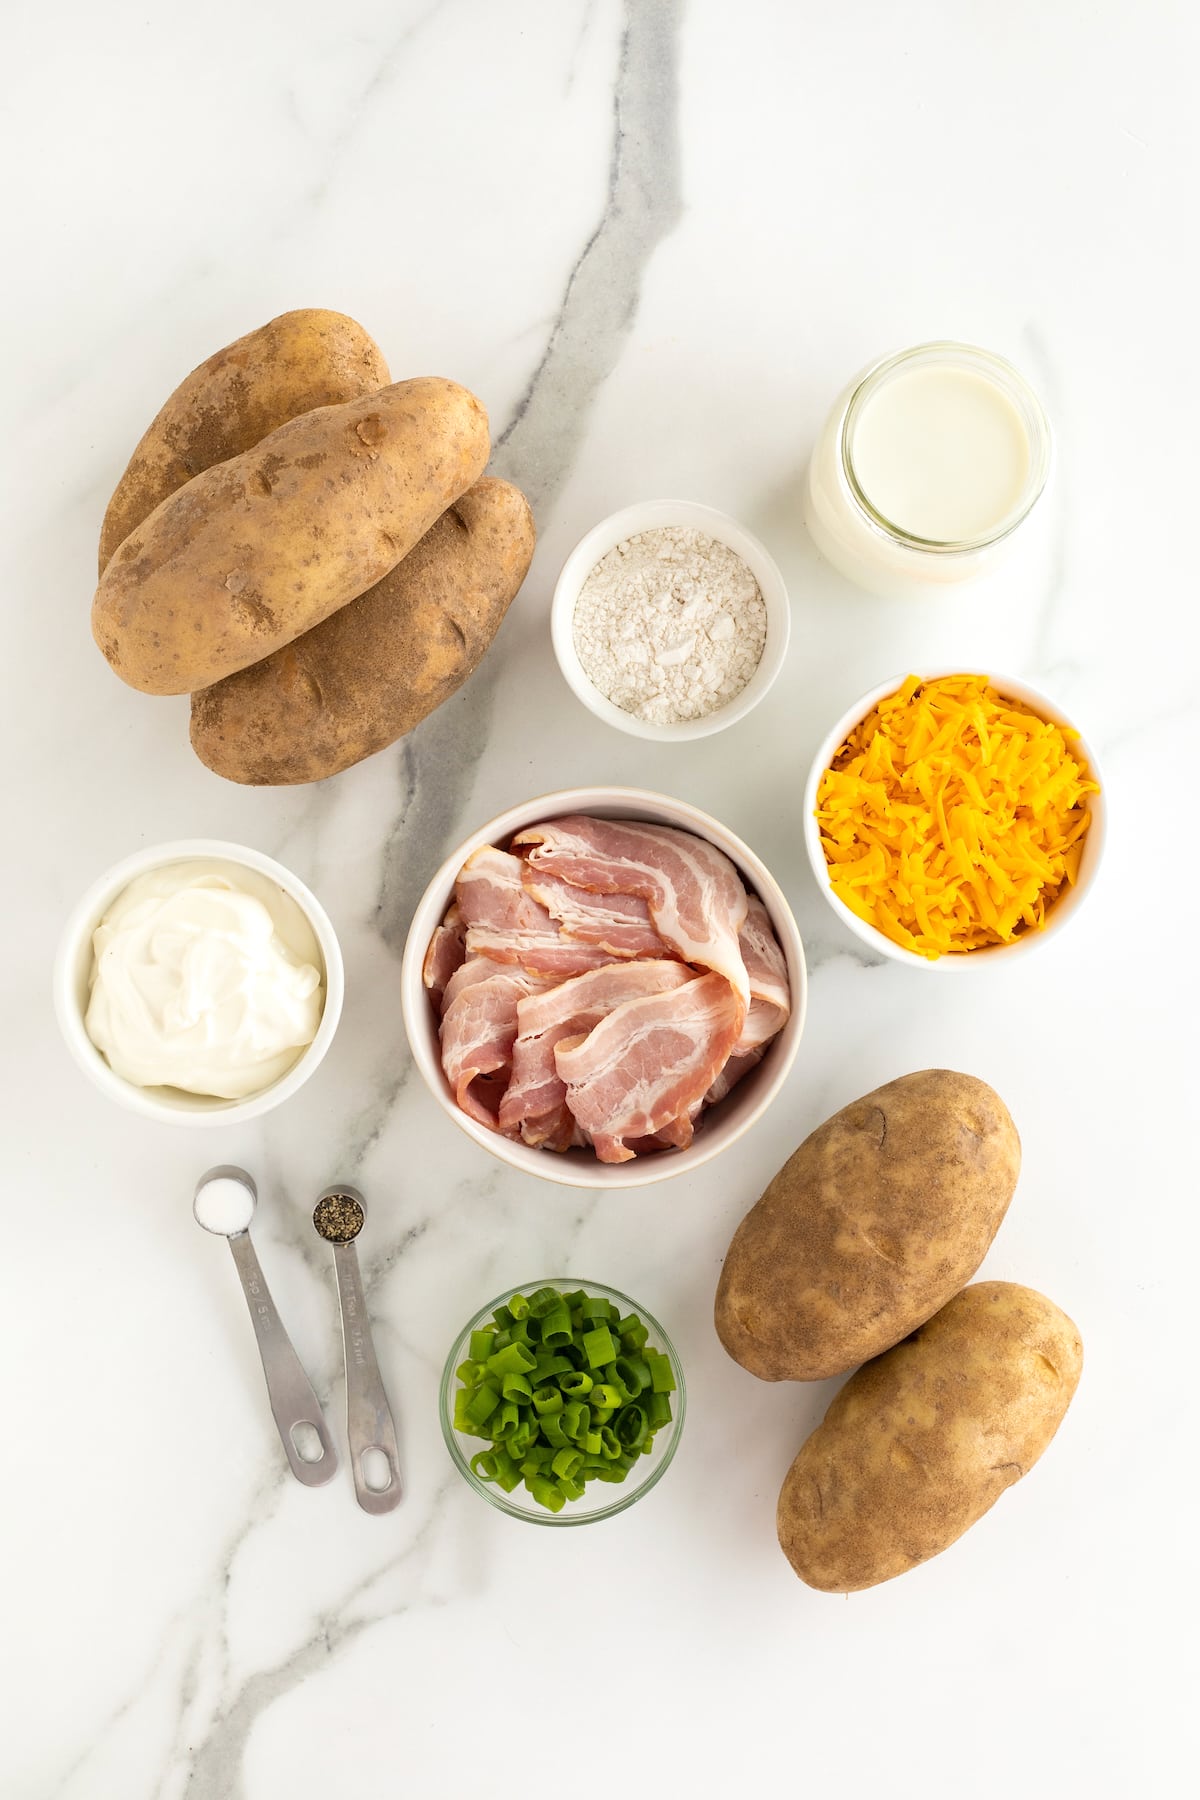 Ingredients for baked potato soup in small white ceramic dishes on a white marble counter.